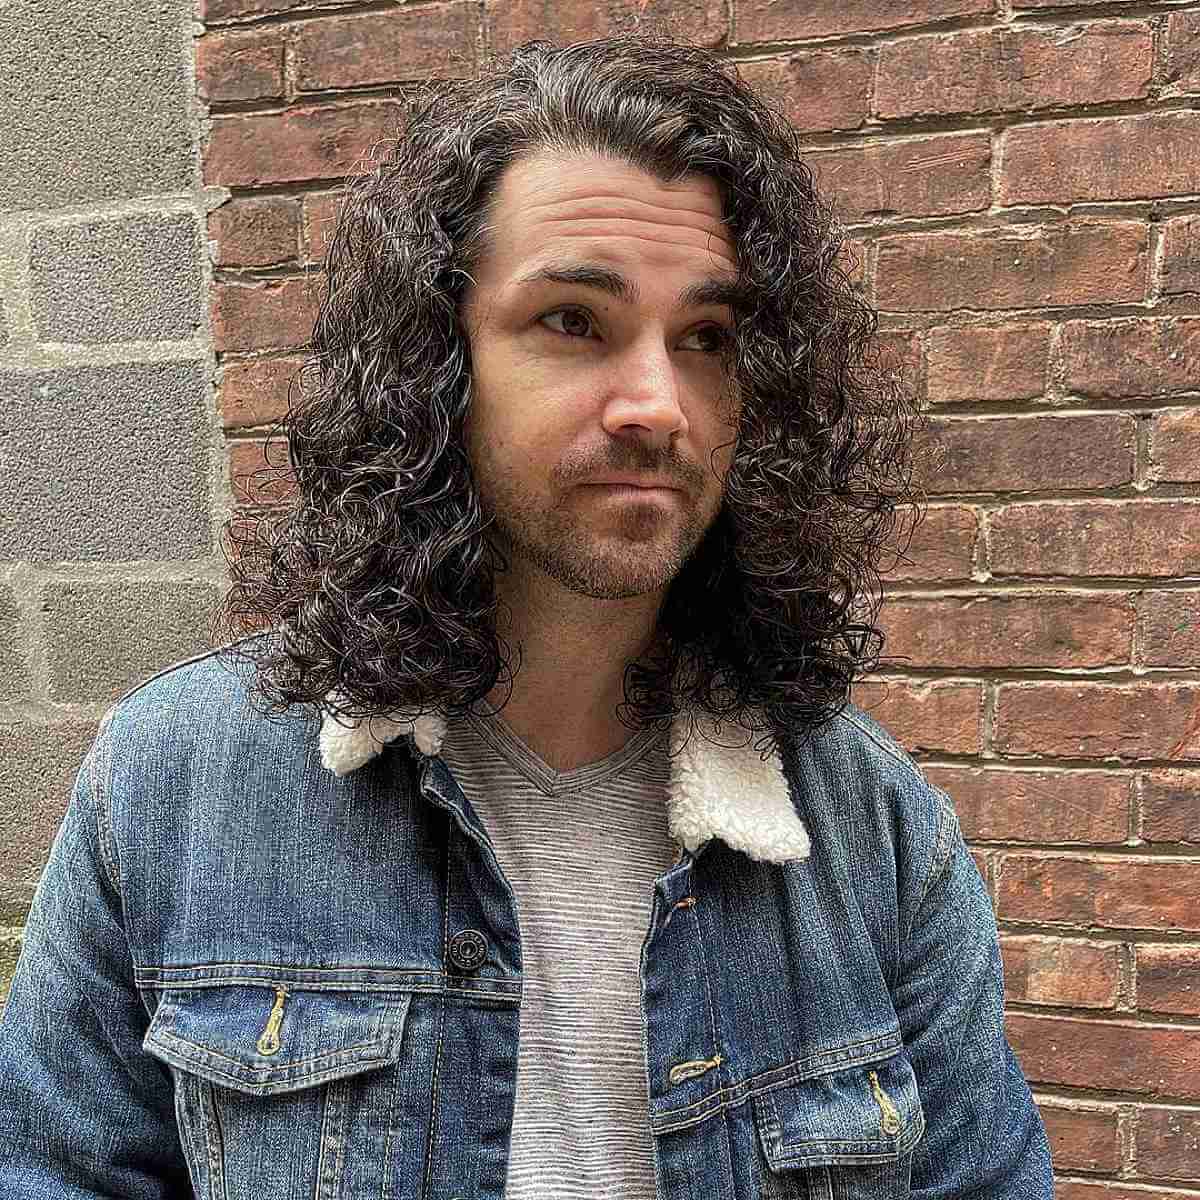 101 of the Best Curly Hairstyles for Men (Haircut Ideas)